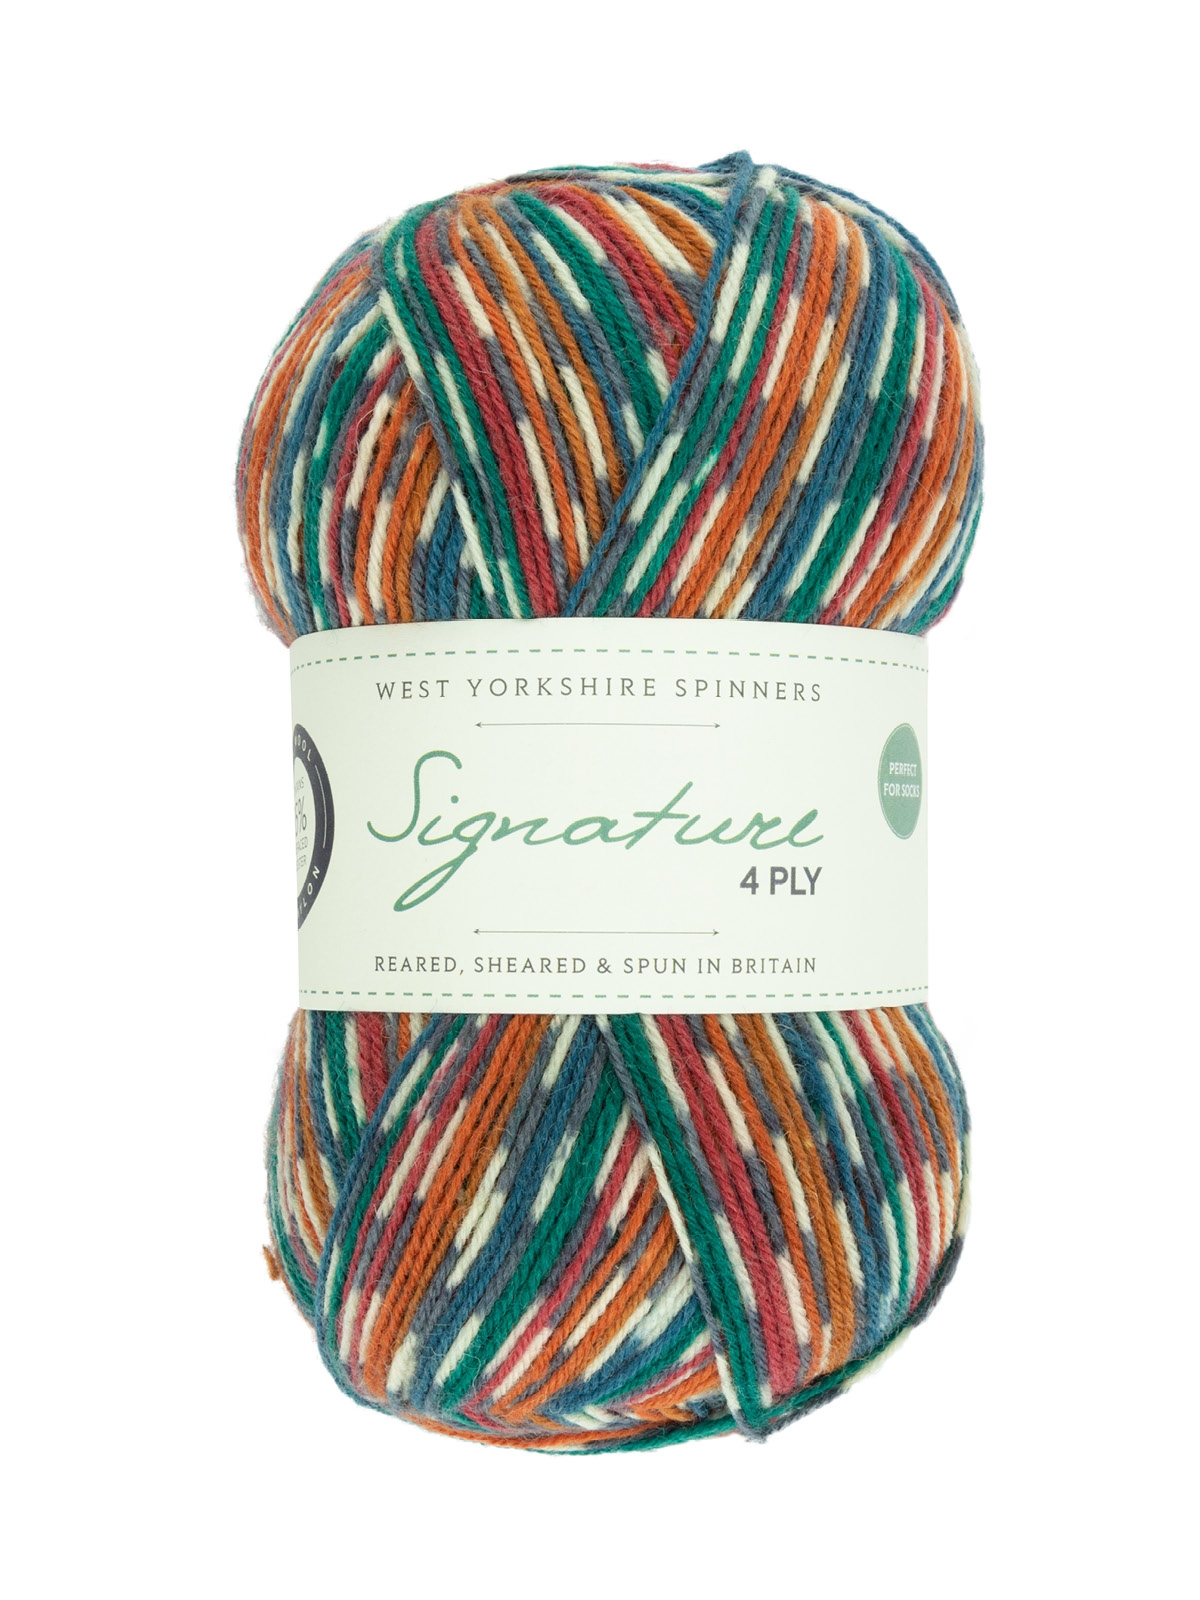 West Yorkshire Spinners Signature 4ply - Country Birds Range product image